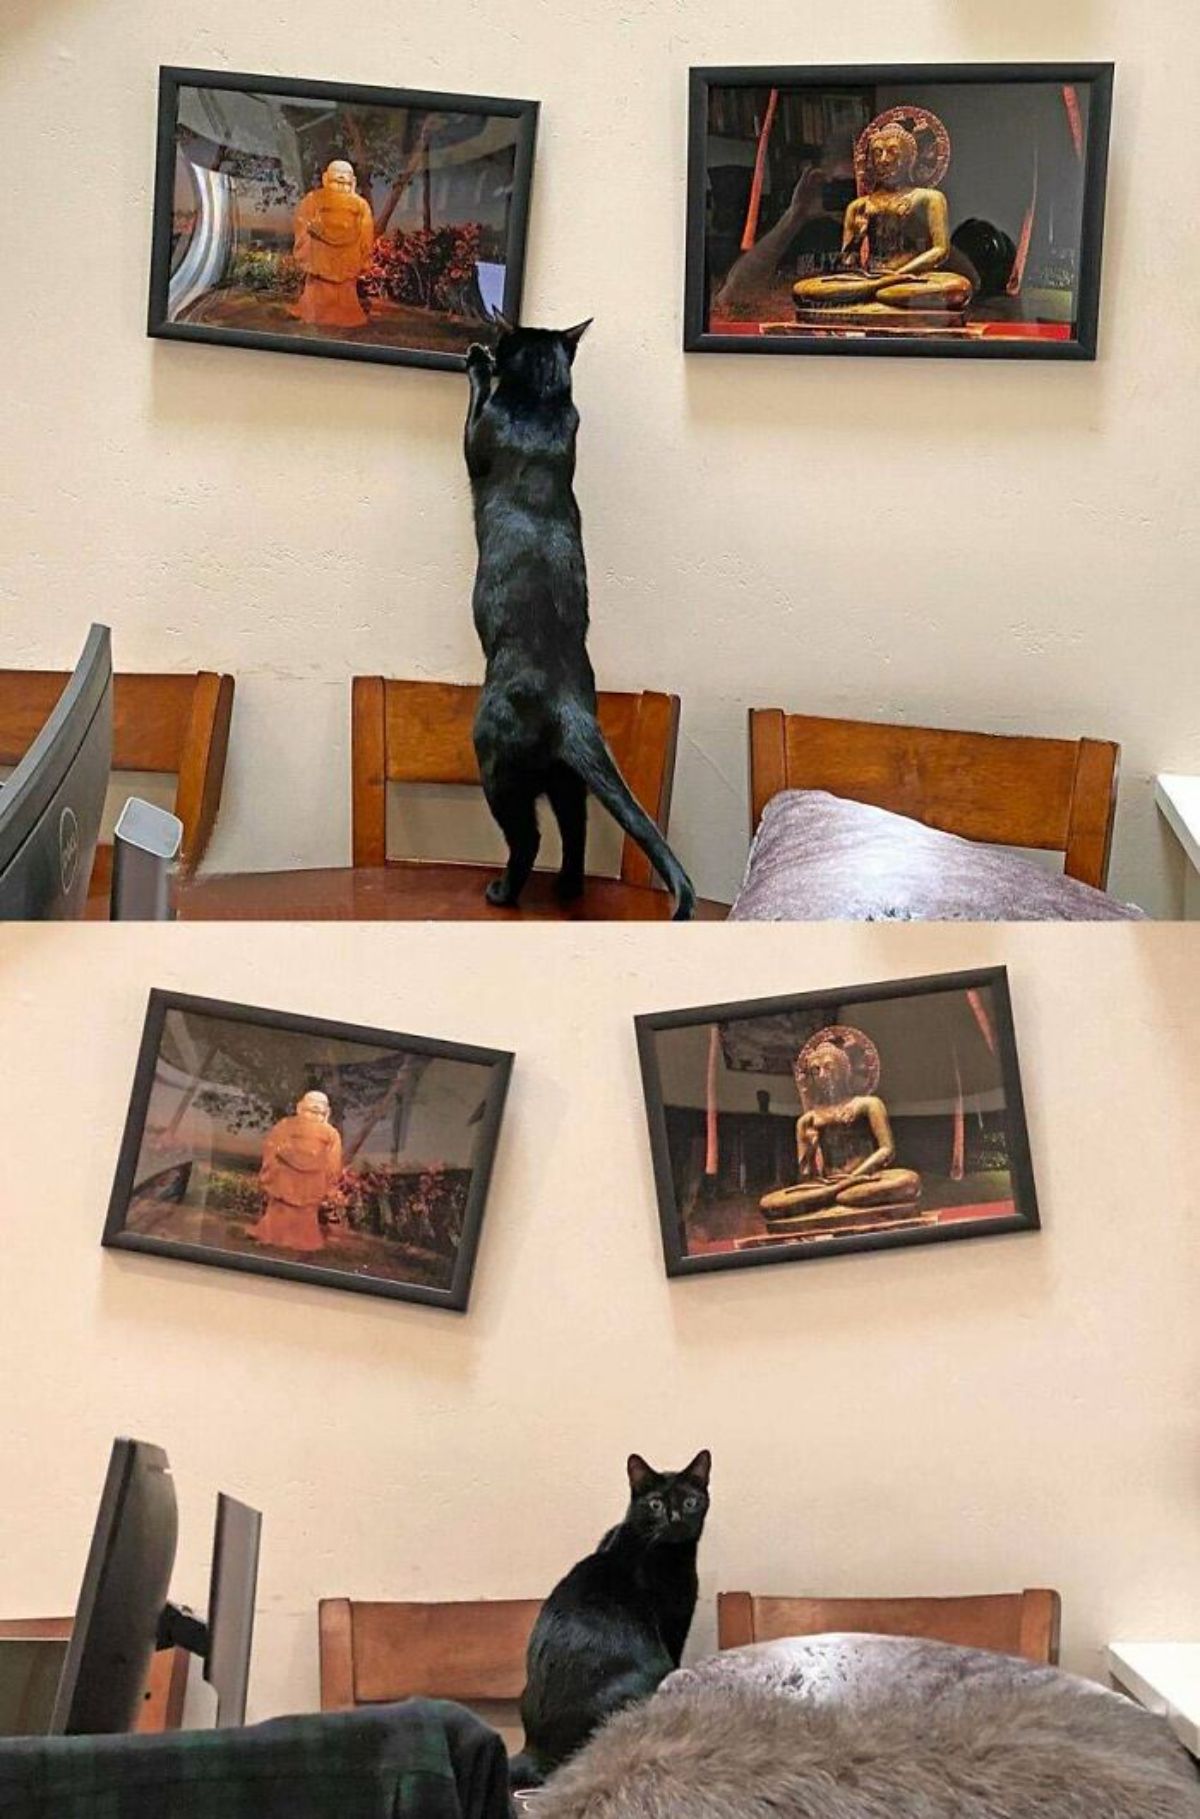 2 photos of a black cat standing on a table and pulling down 2 framed photos on a wall